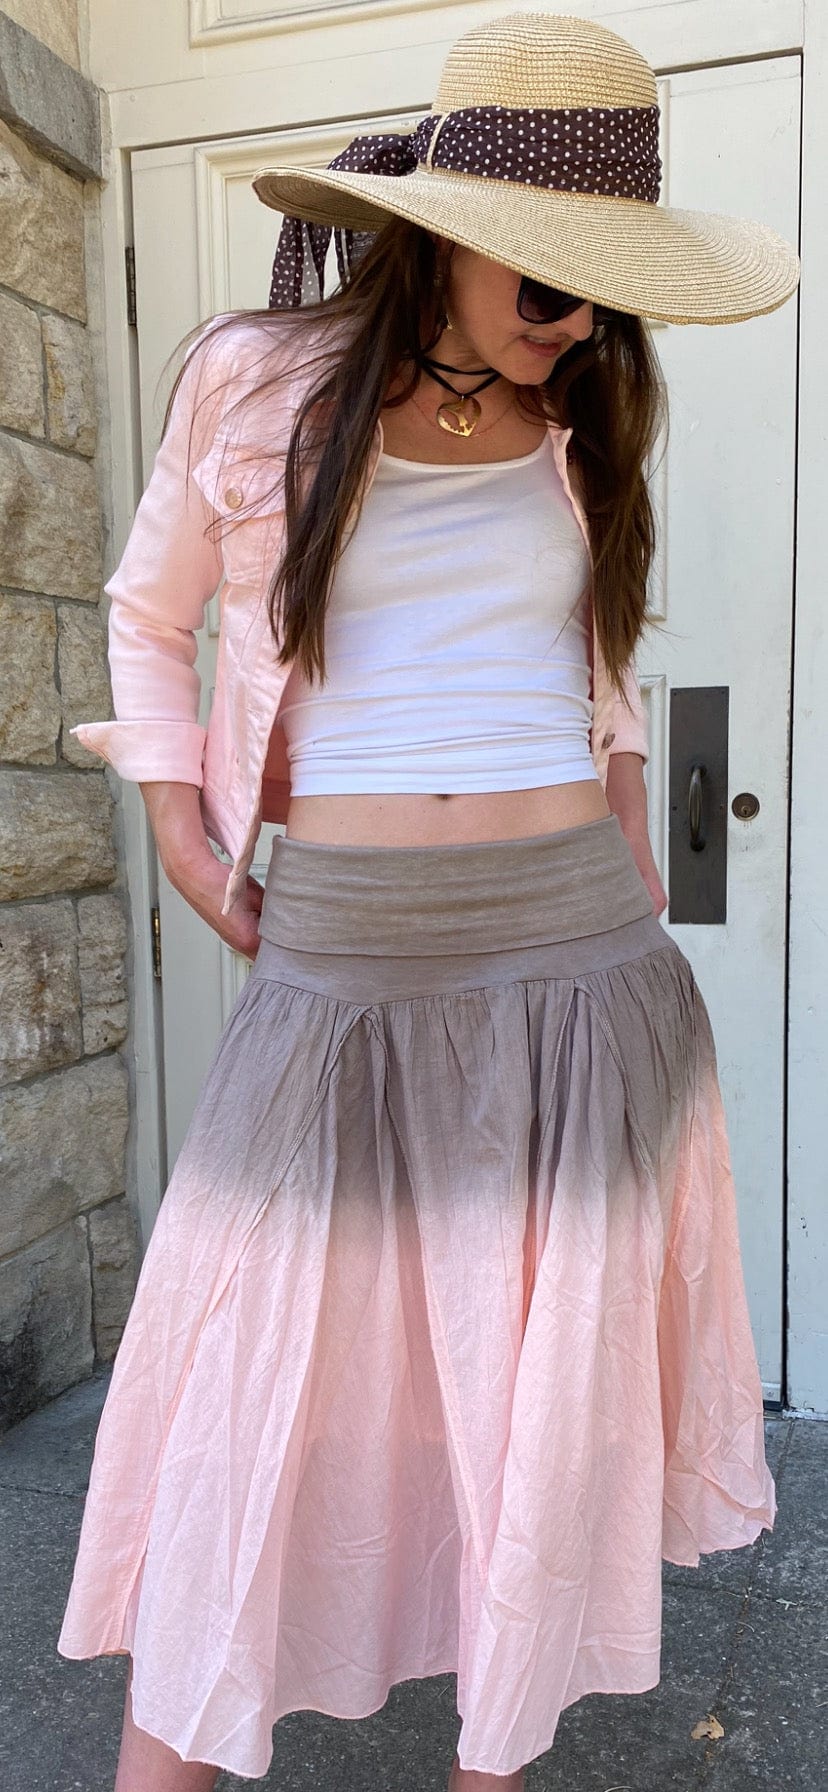 Ombery Pink 100% Cotton Short Skirt Hand Wash Cold Separately Air Dry Imported Available Sizes: Small, Medium, Large and Extra Large. Enjoy this Beautiful Pink Ombery Midi Skirt, 100% Cotton. This Midi Skirt is perfect to wear in Summer and also for a beach party.